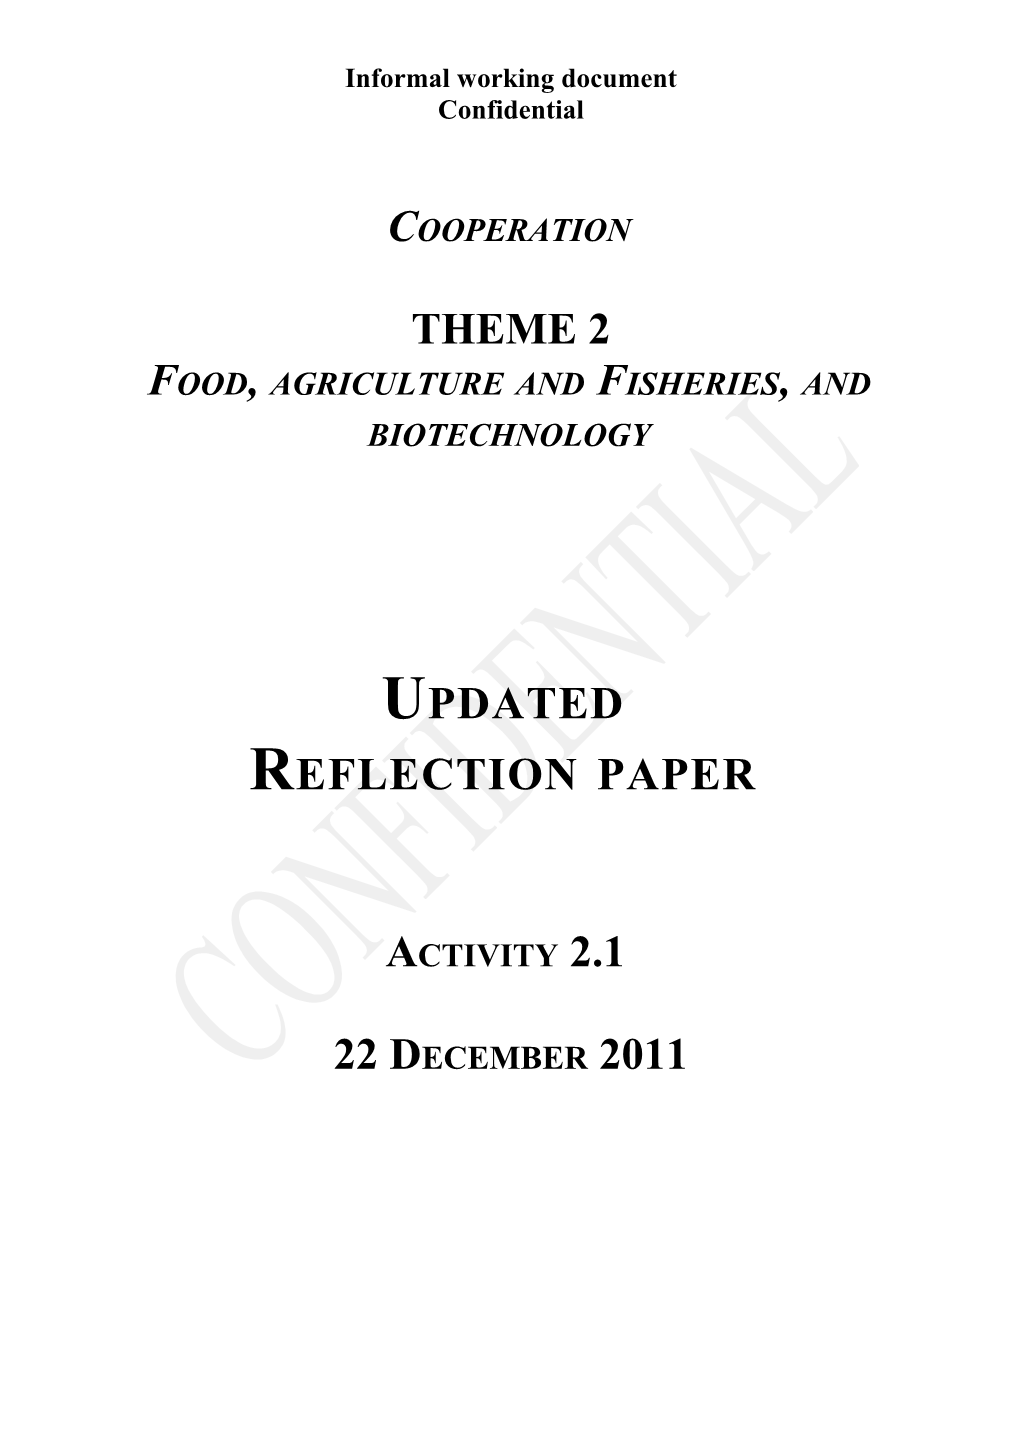 Food, Agriculture and Fisheries, and Biotechnology